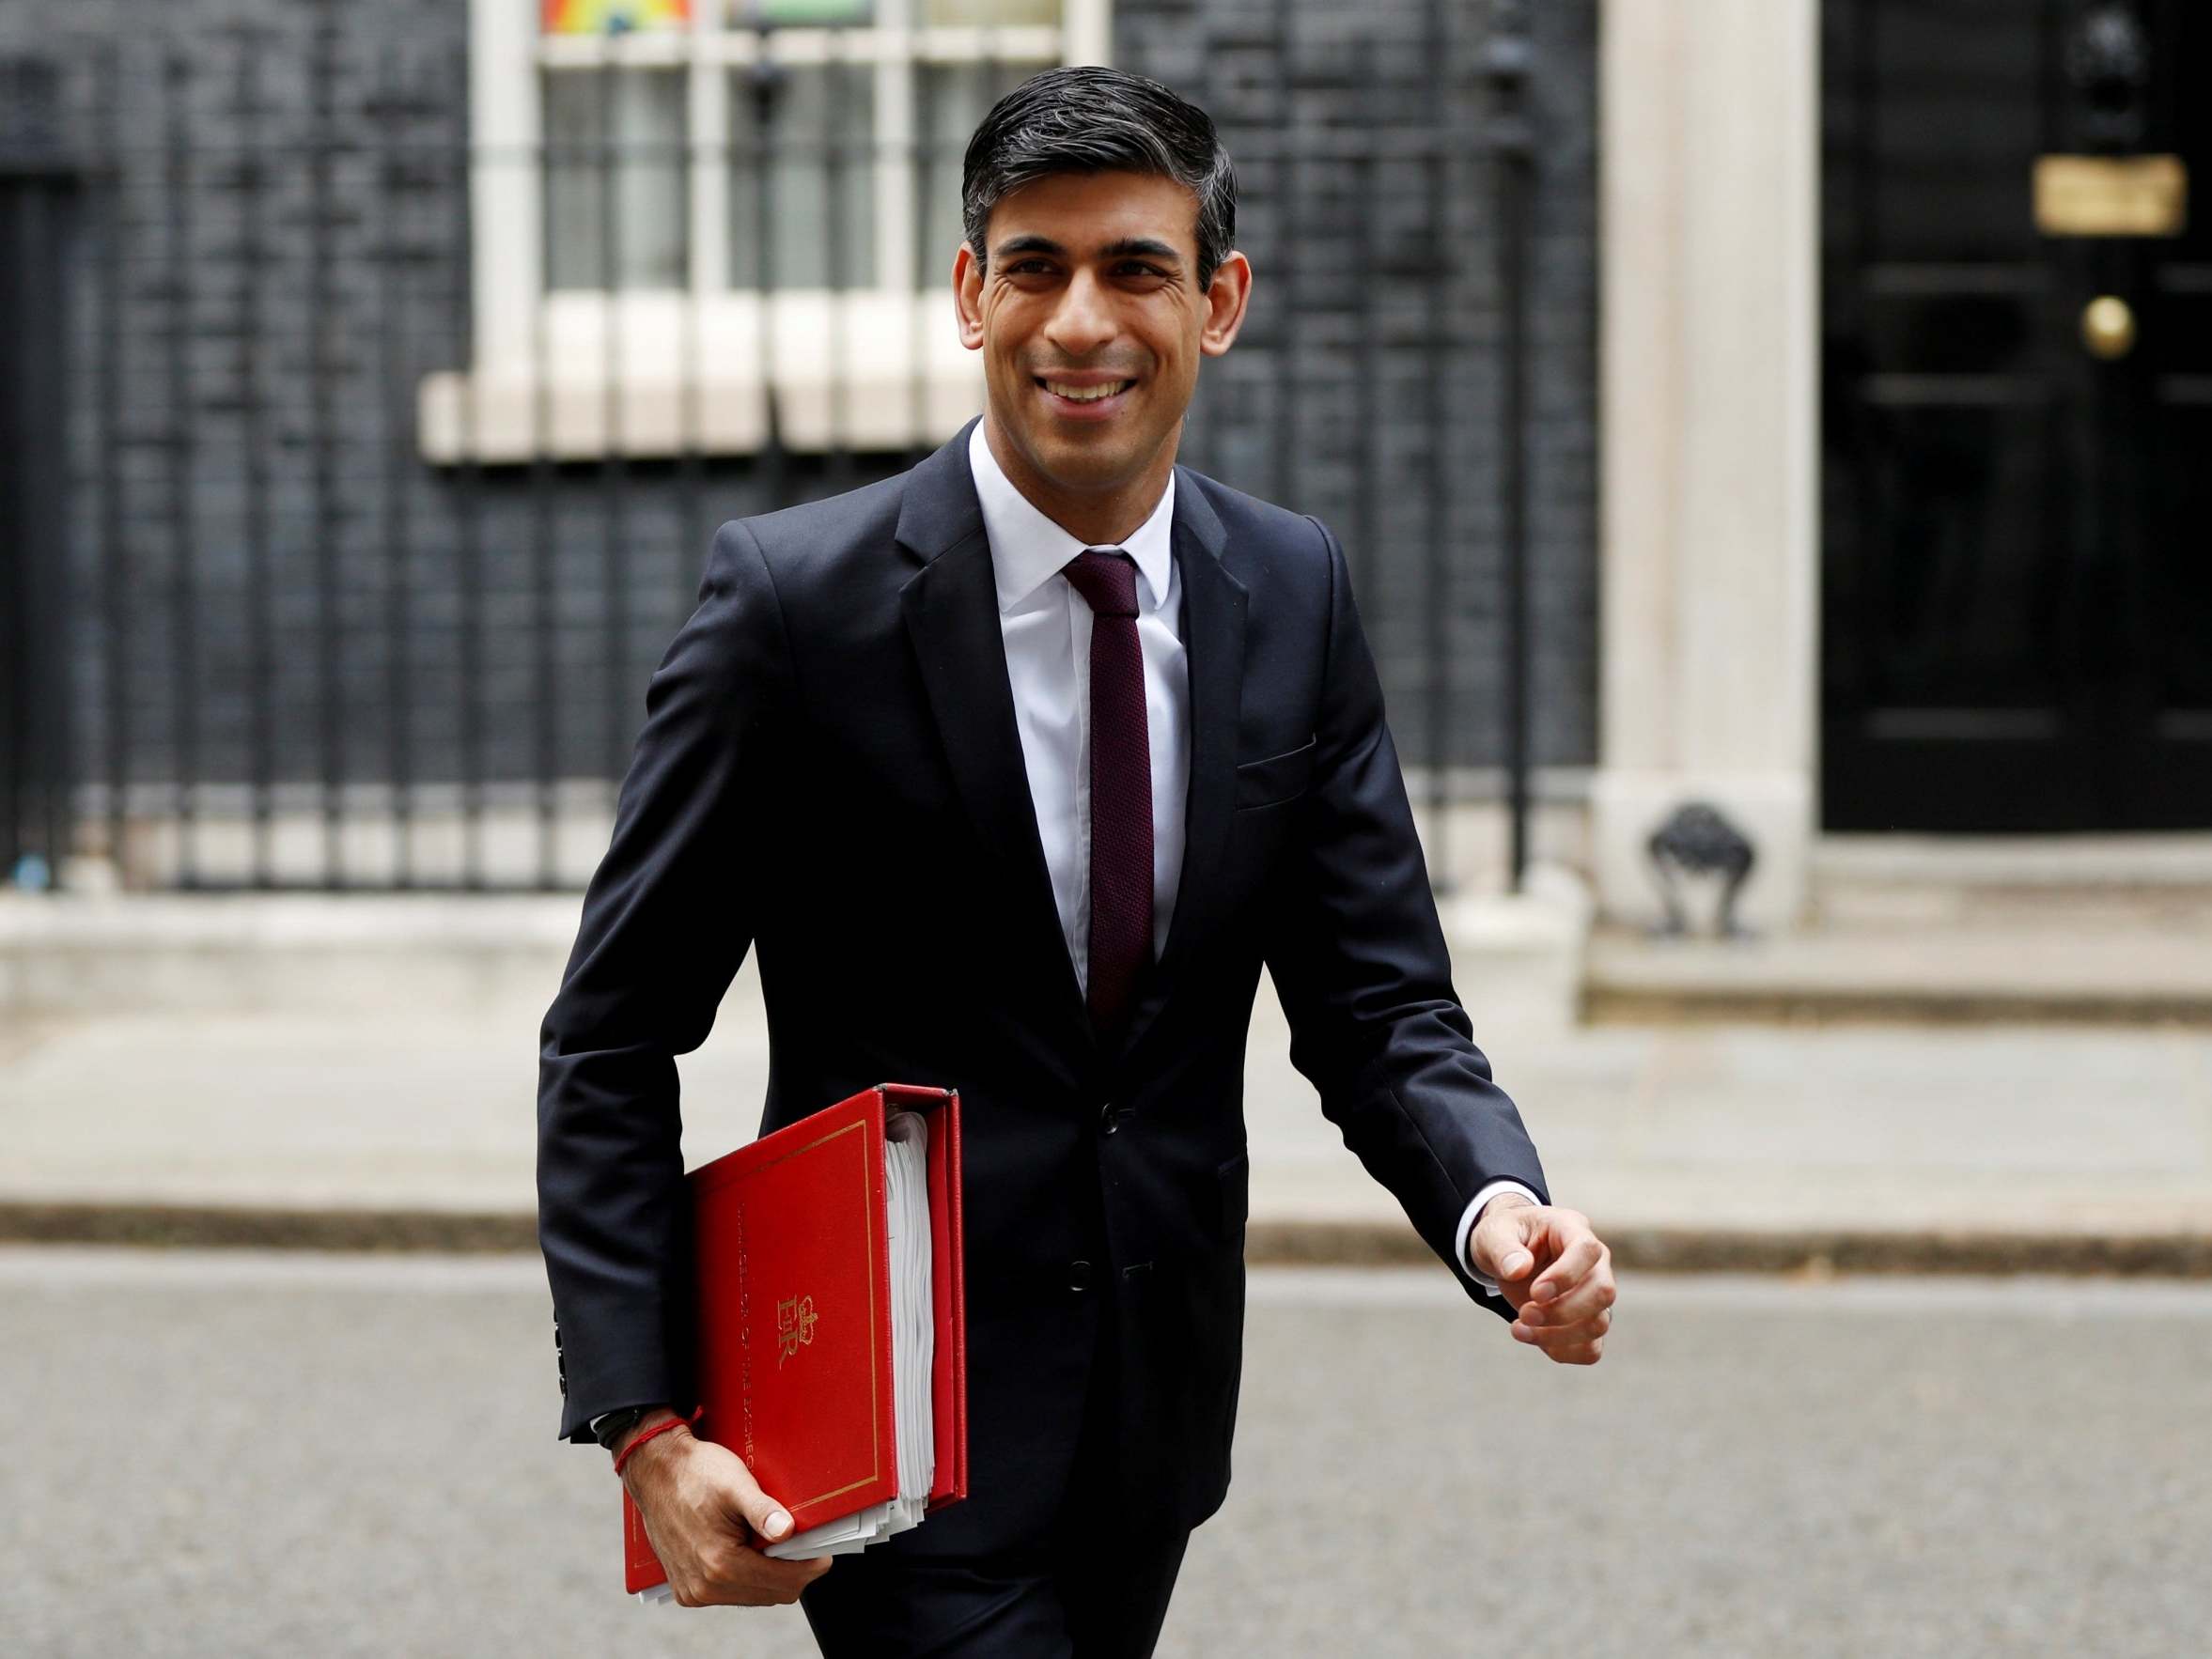 It’s the one tax rise that will appeal to fiscal hawk Rishi Sunak